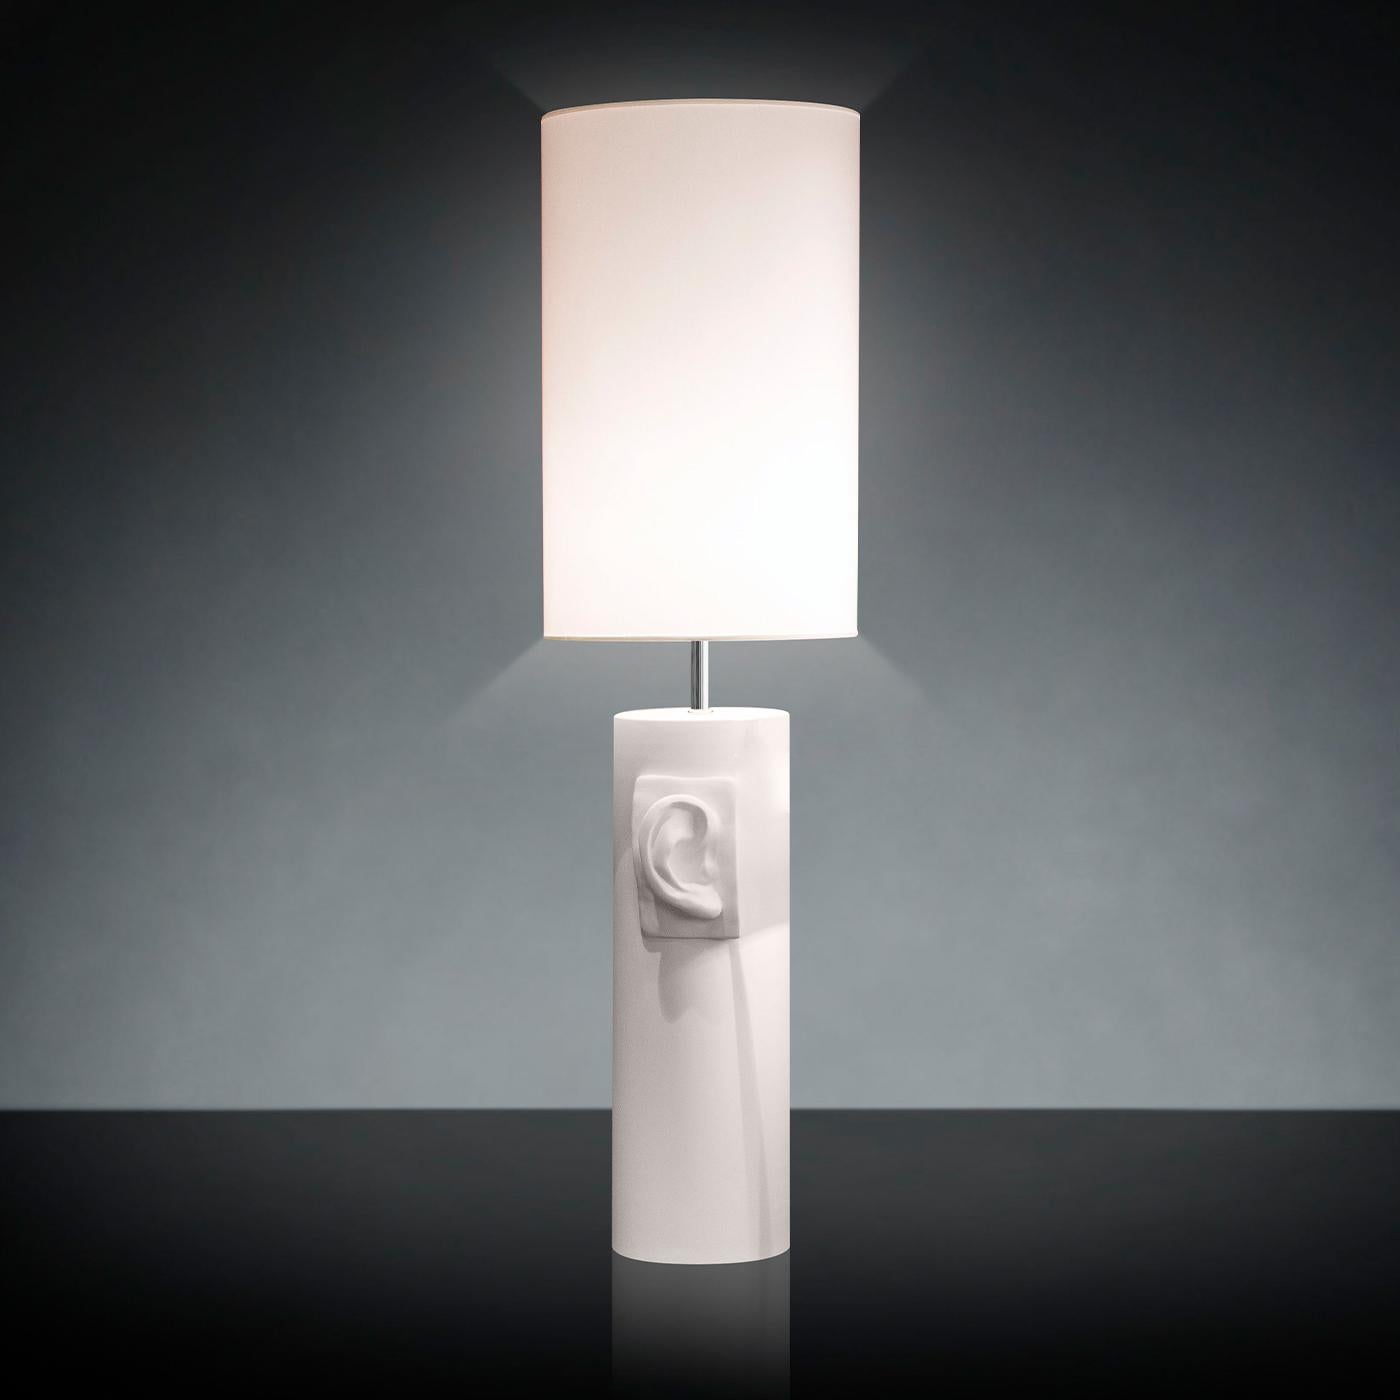 Marked by a sleek cylindrical silhouette, this white ceramic lamp belongs to a series of vases and floor/table lamps that celebrate Italian art and handicraft. A piece of strong visual impact, this modern design features a tall lampshade housing a